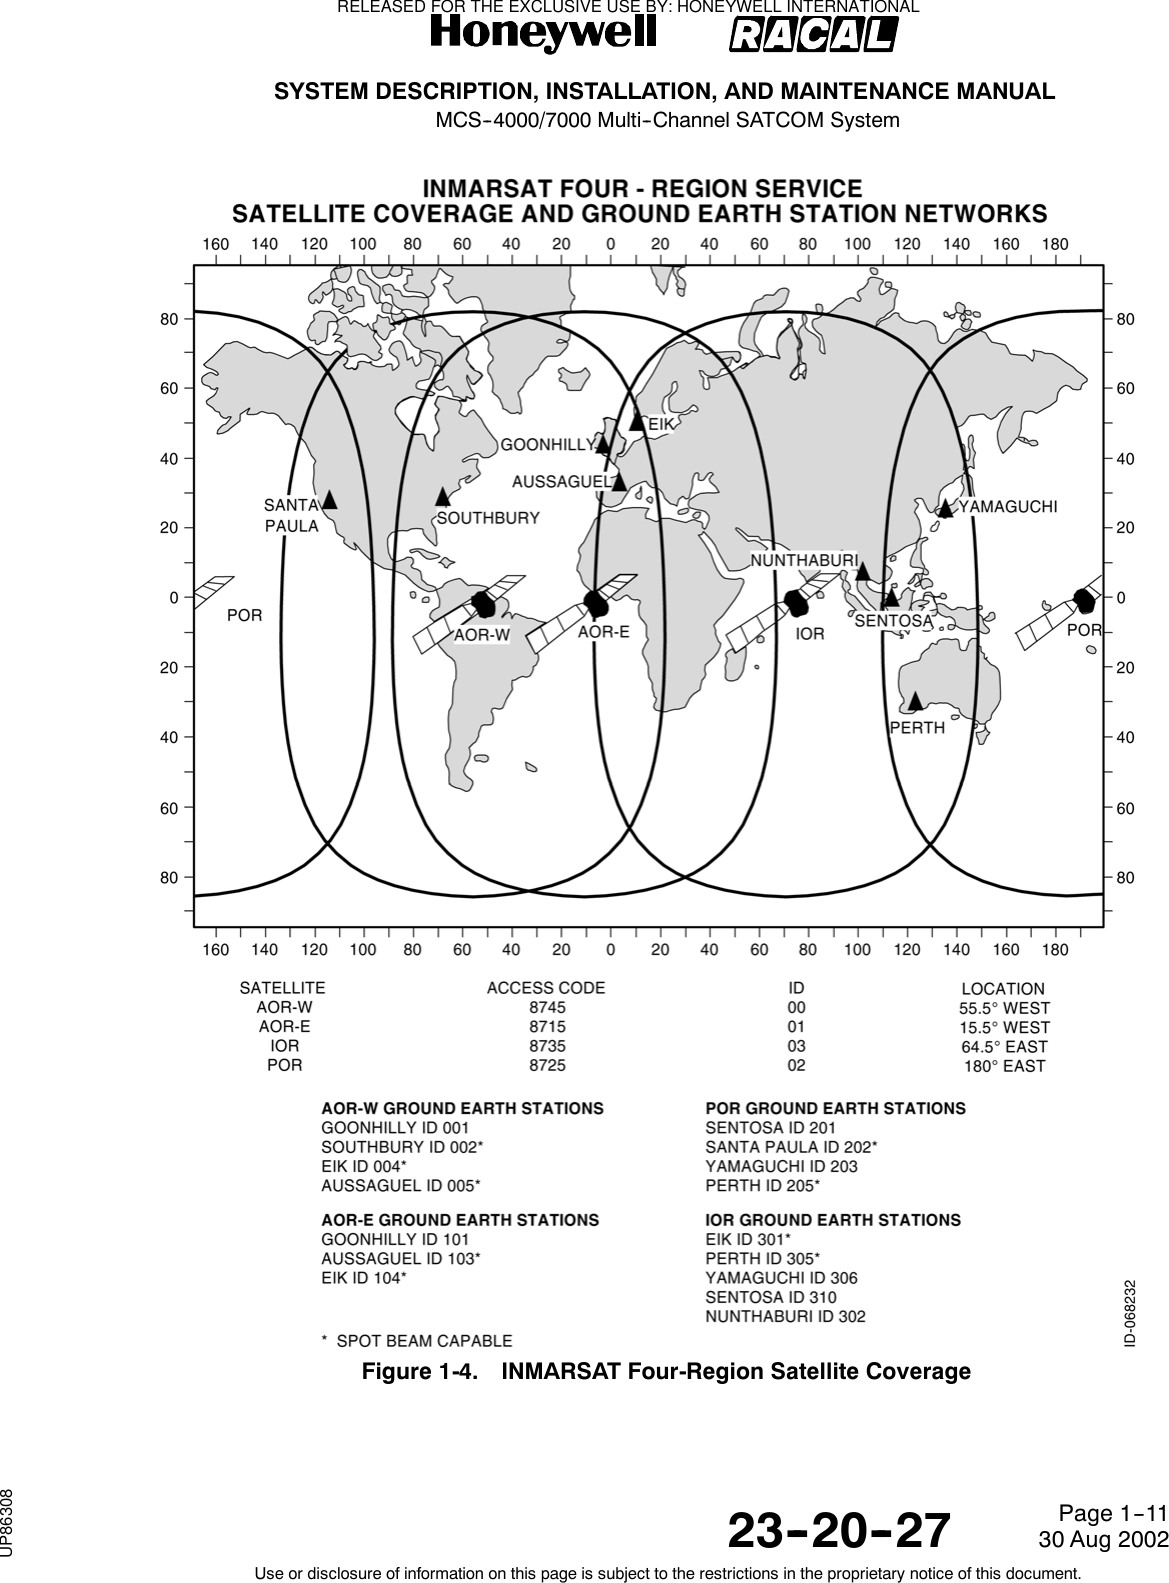 SYSTEM DESCRIPTION, INSTALLATION, AND MAINTENANCE MANUALMCS--4000/7000 Multi--Channel SATCOM System23--20--2730 Aug 2002Use or disclosure of information on this page is subject to the restrictions in the proprietary notice of this document.Page 1--11Figure 1-4. INMARSAT Four-Region Satellite CoverageRELEASED FOR THE EXCLUSIVE USE BY: HONEYWELL INTERNATIONALUP86308